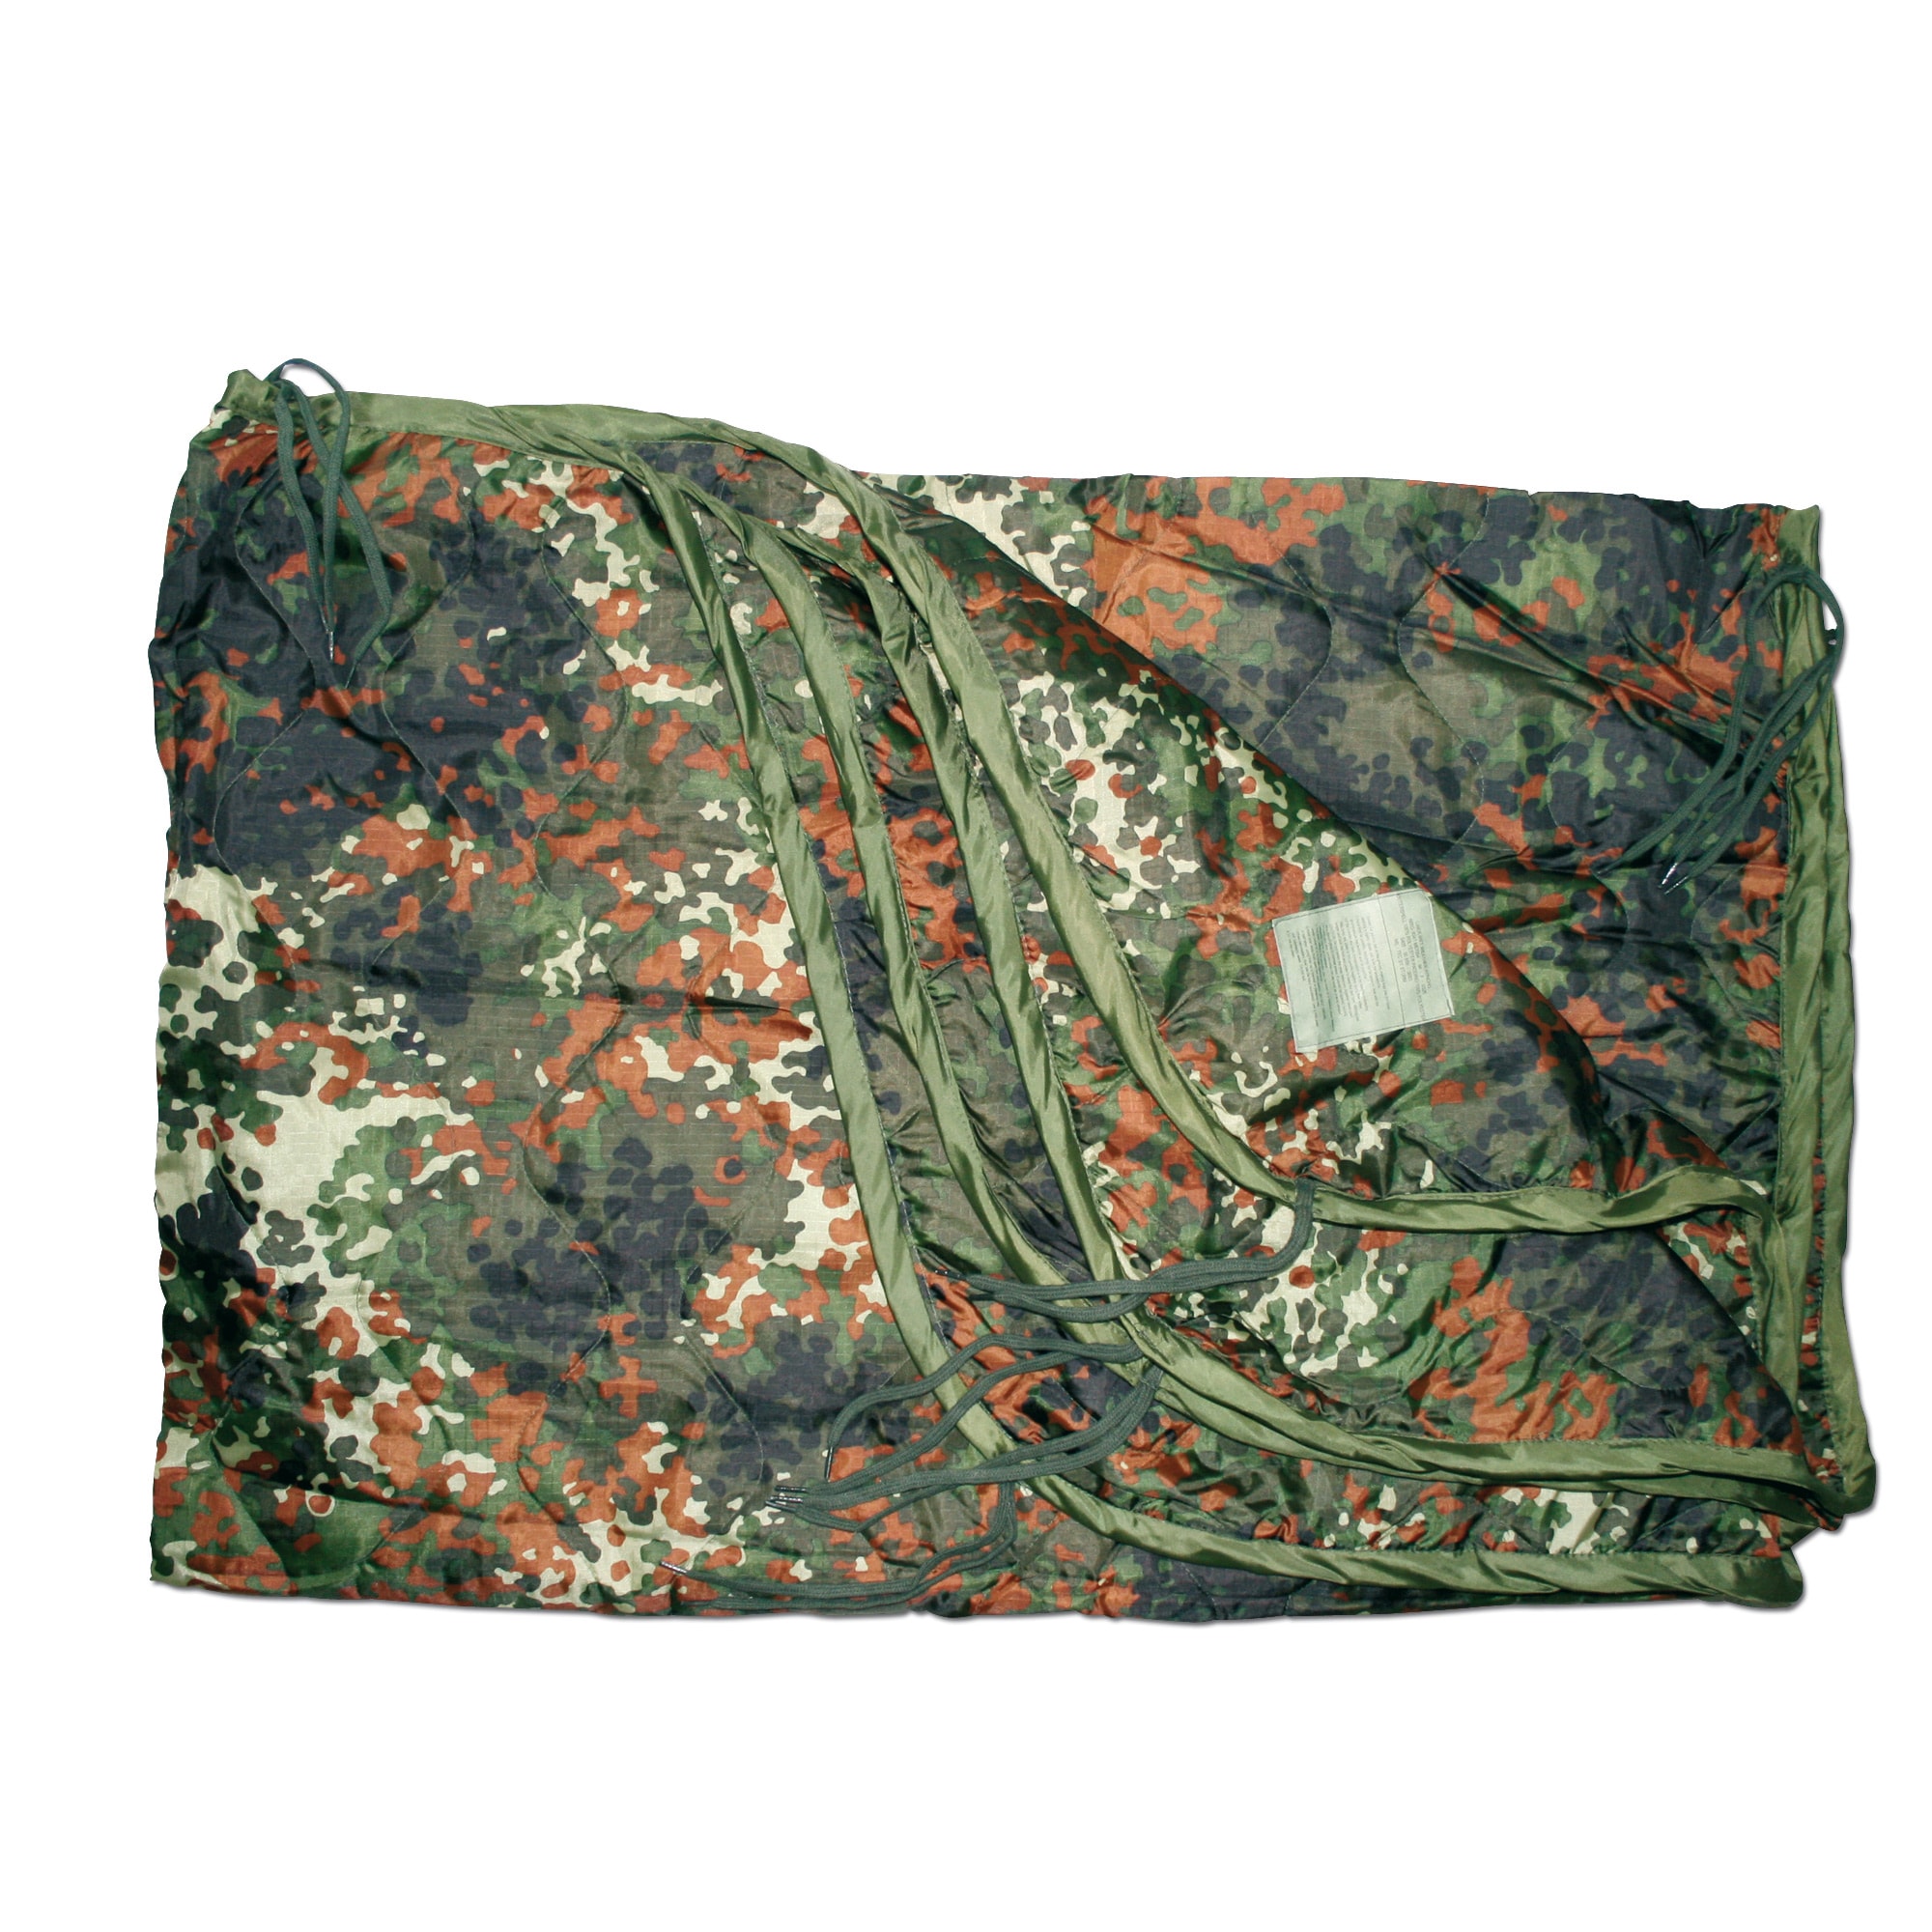 German Military style Poncho Liner Wet Cold Weather Flecktarn Camouflage Blanket 